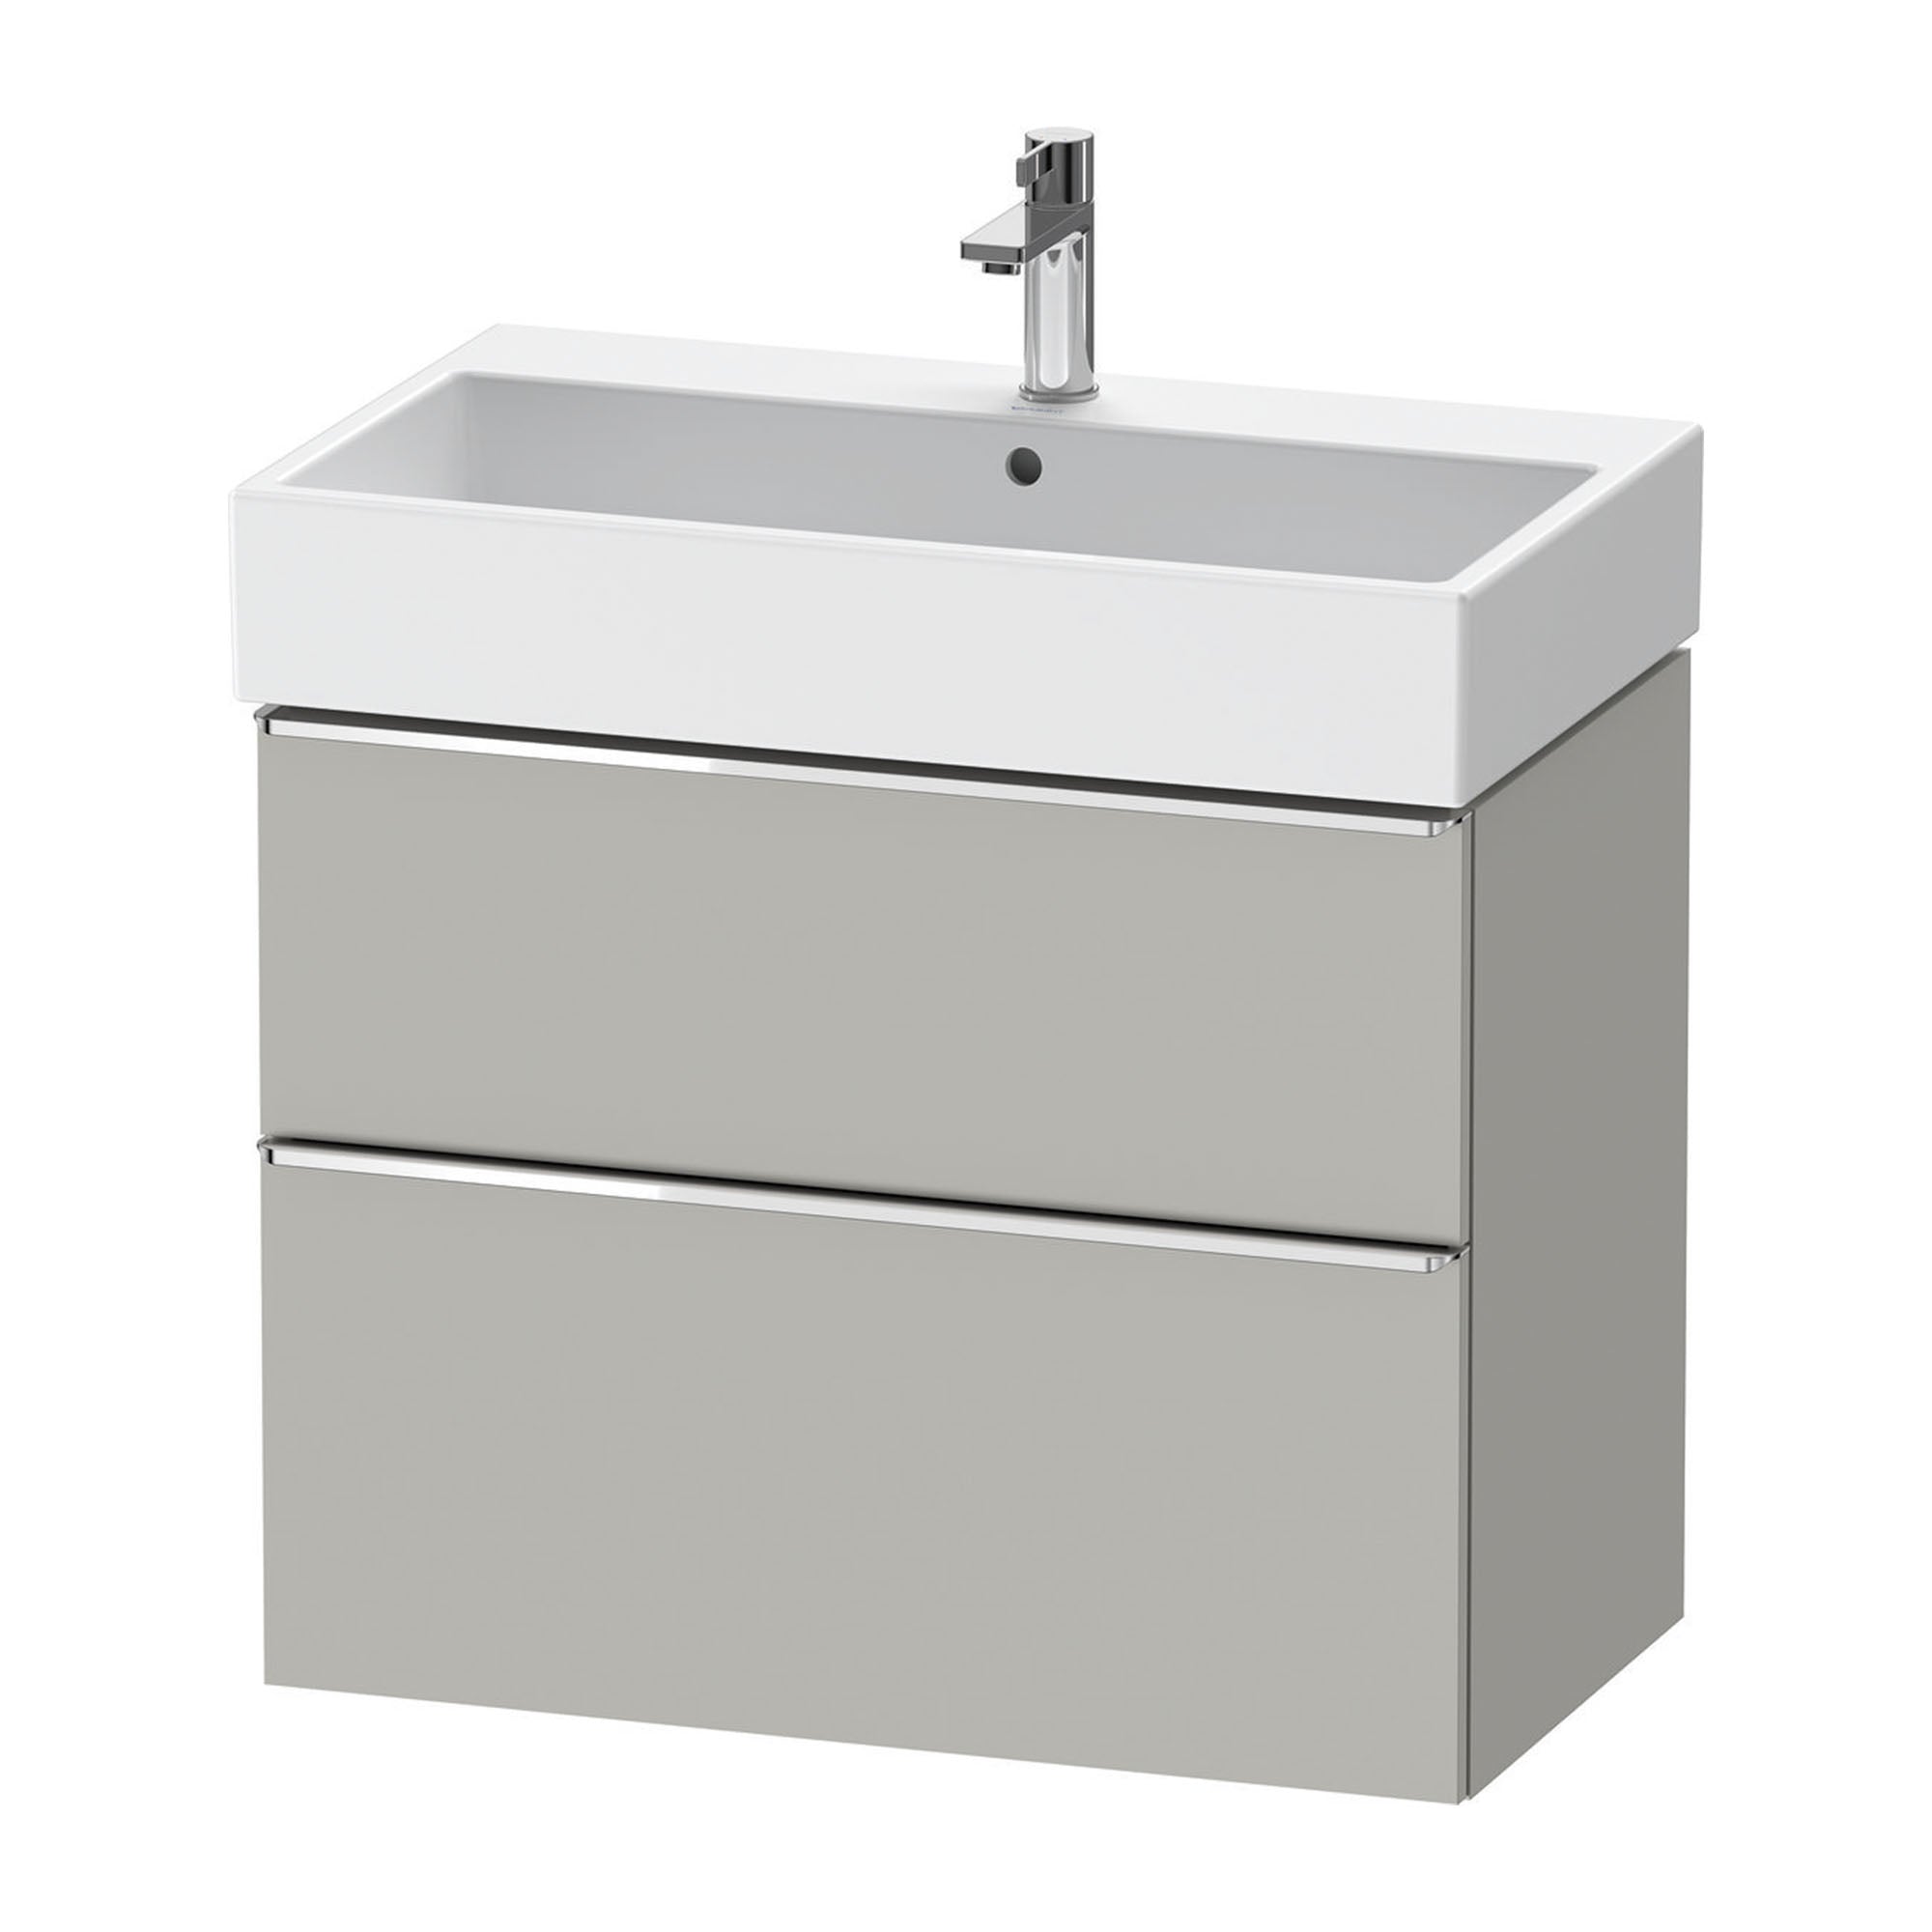 duravit d-neo 800 wall mounted vanity-unit with vero basin concrete grey chrome handles